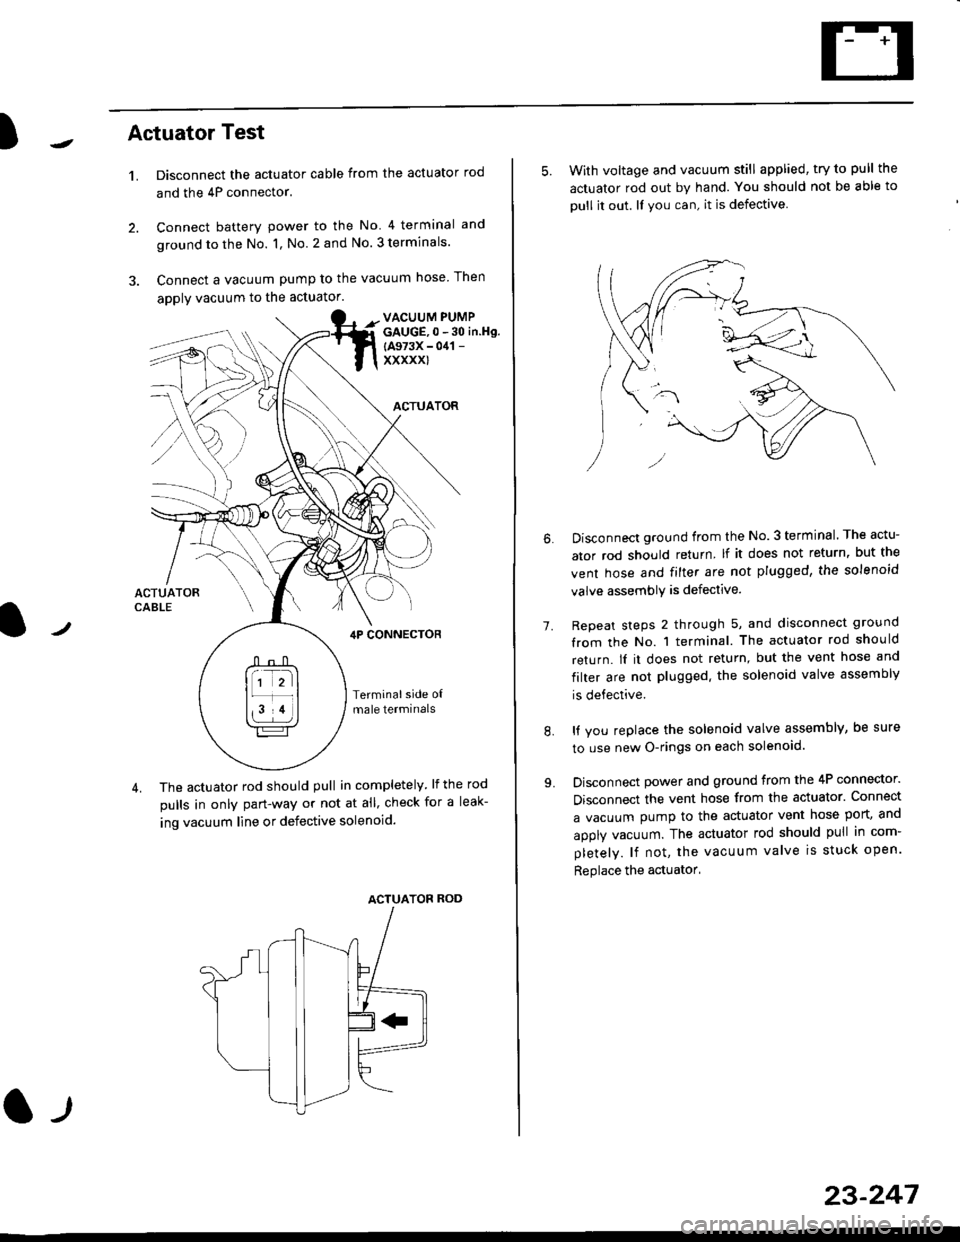 HONDA CIVIC 1997 6.G Workshop Manual )Actuator Test
t.Disconnect the actuator cable from the actuator rod
and the 4P connector.
Connect battery power to the No 4 terminal and
ground to the No. 1, No. 2 and No. 3 terminals.
Connect a vac